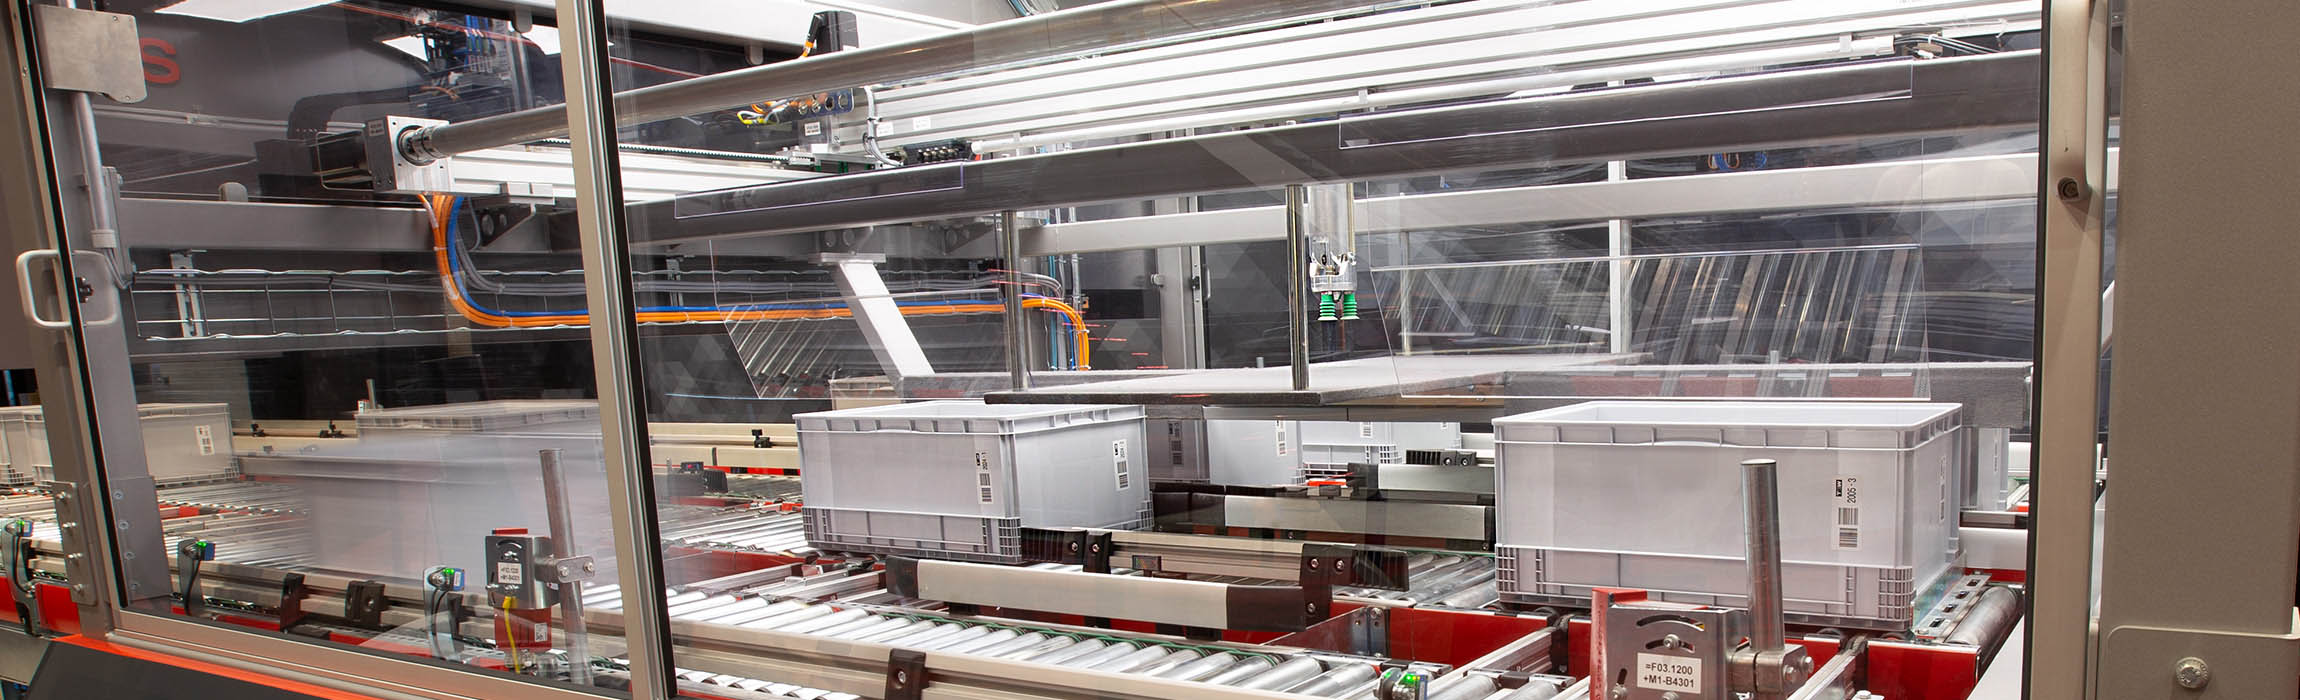 Cognitive robotics and as well as machine learning form a fully automated picking solution.